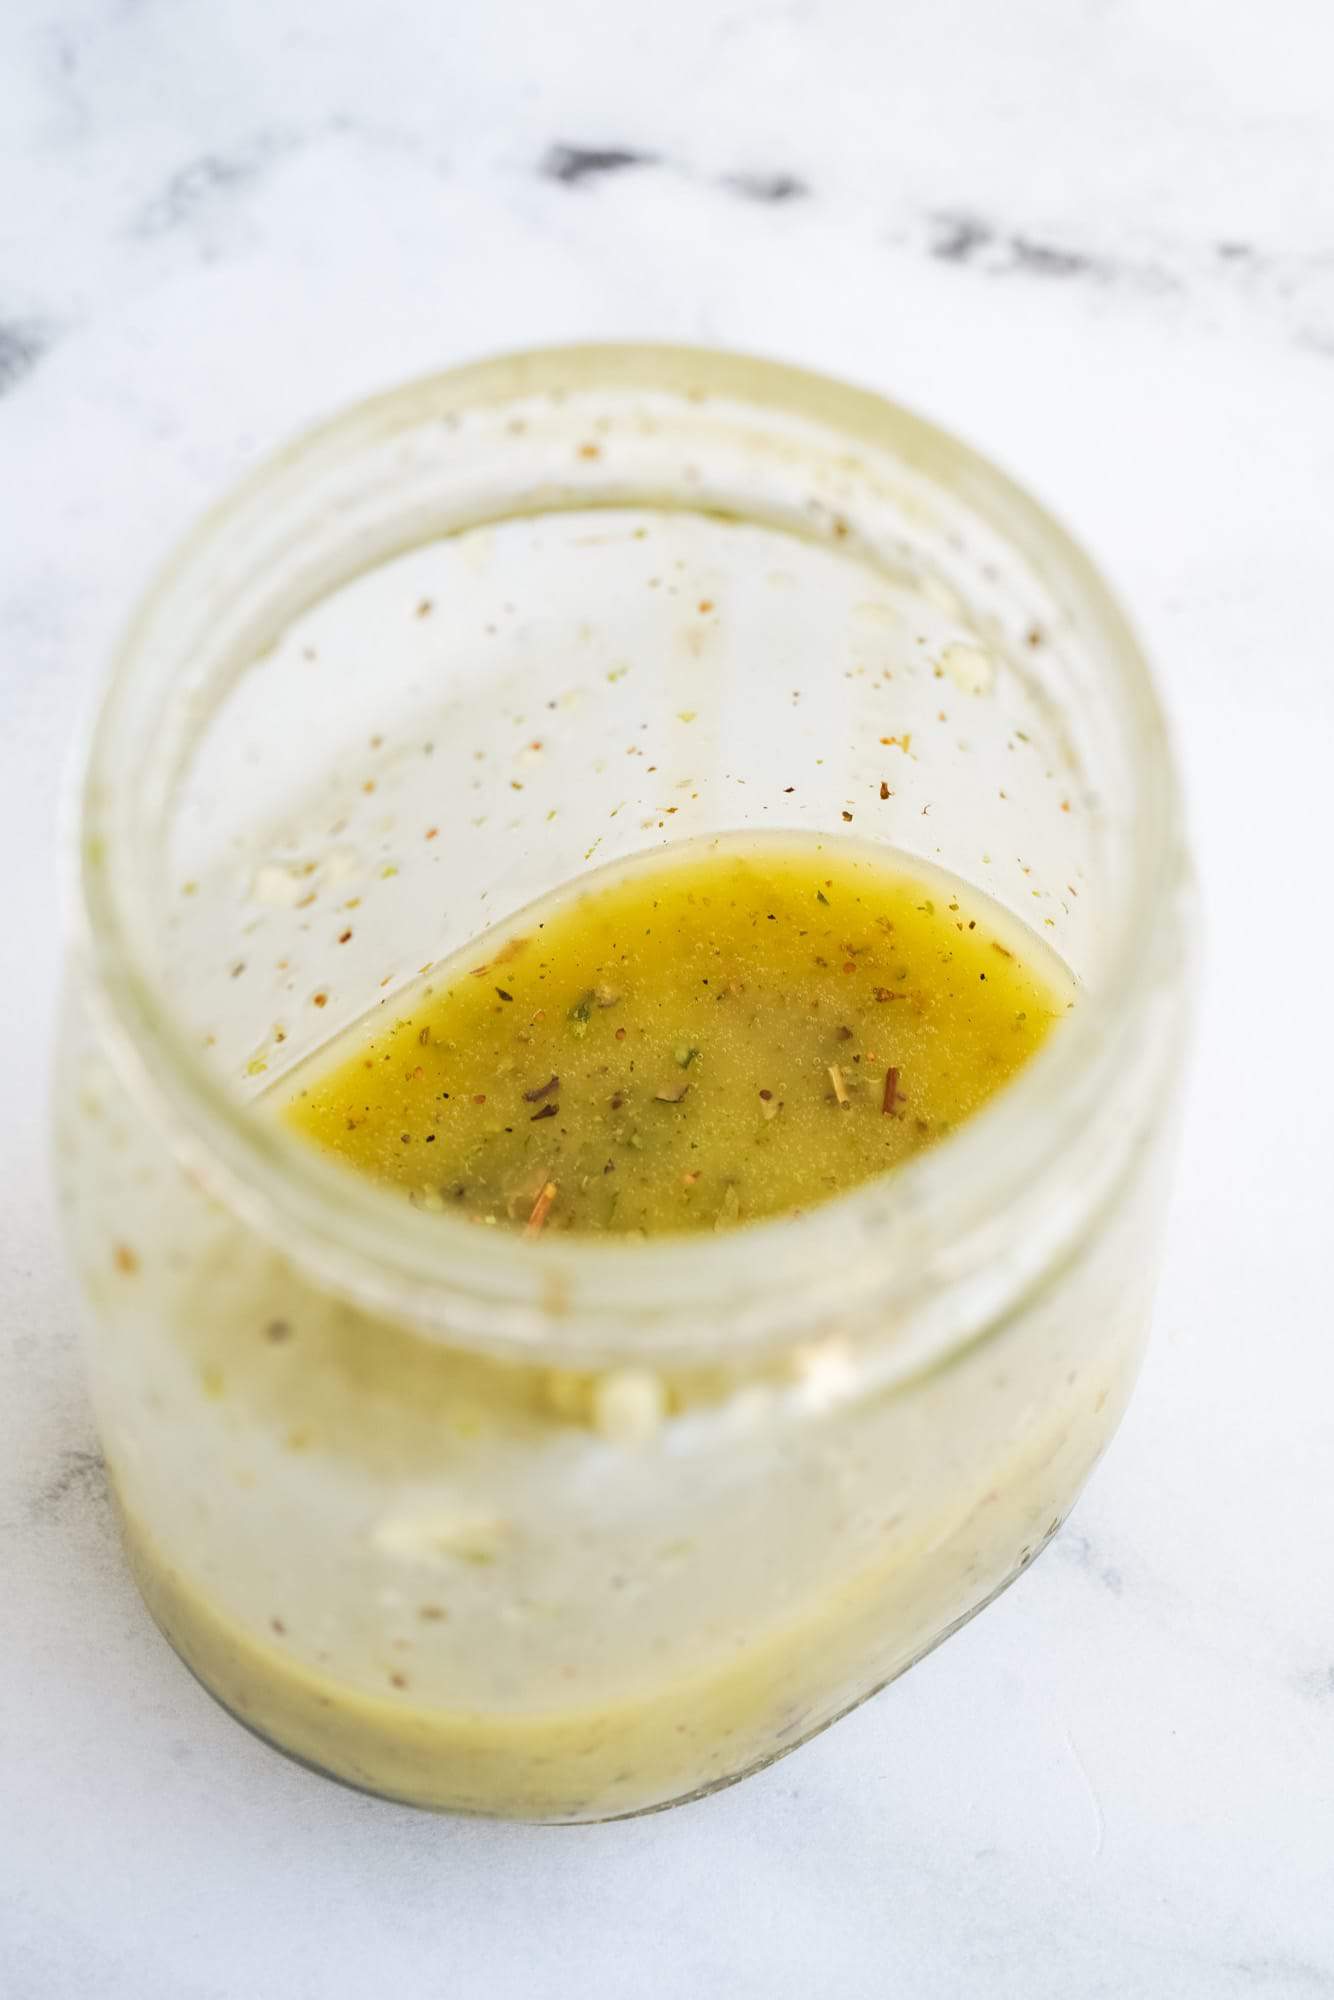 homemade 1905 salad dressing in a glass jar.